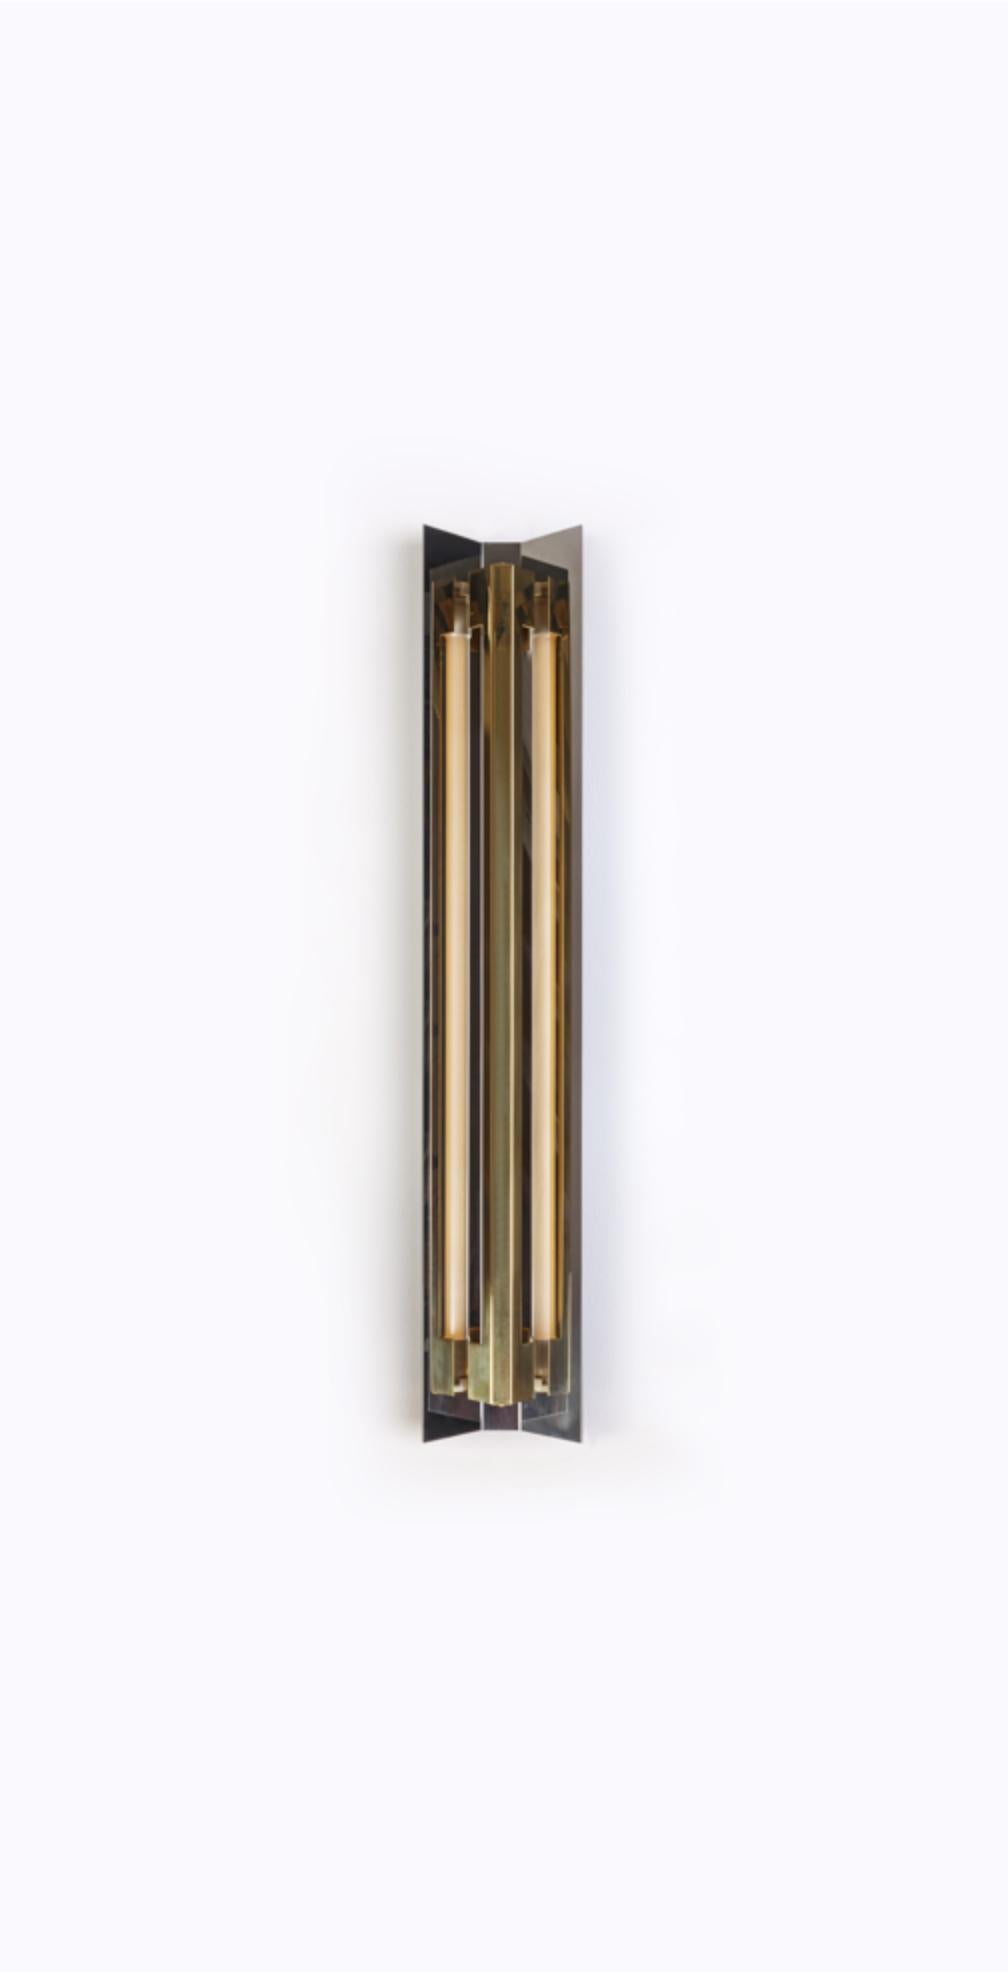 Medium Misalliance solid brass wall light by Lexavala
Dimensions: D 16 x W 100 x H 8 cm
Materials: Brass.

There are two lenghts of socket covers, extending over the LED. Two short are to be found in Suspended and Surface, and one long in the